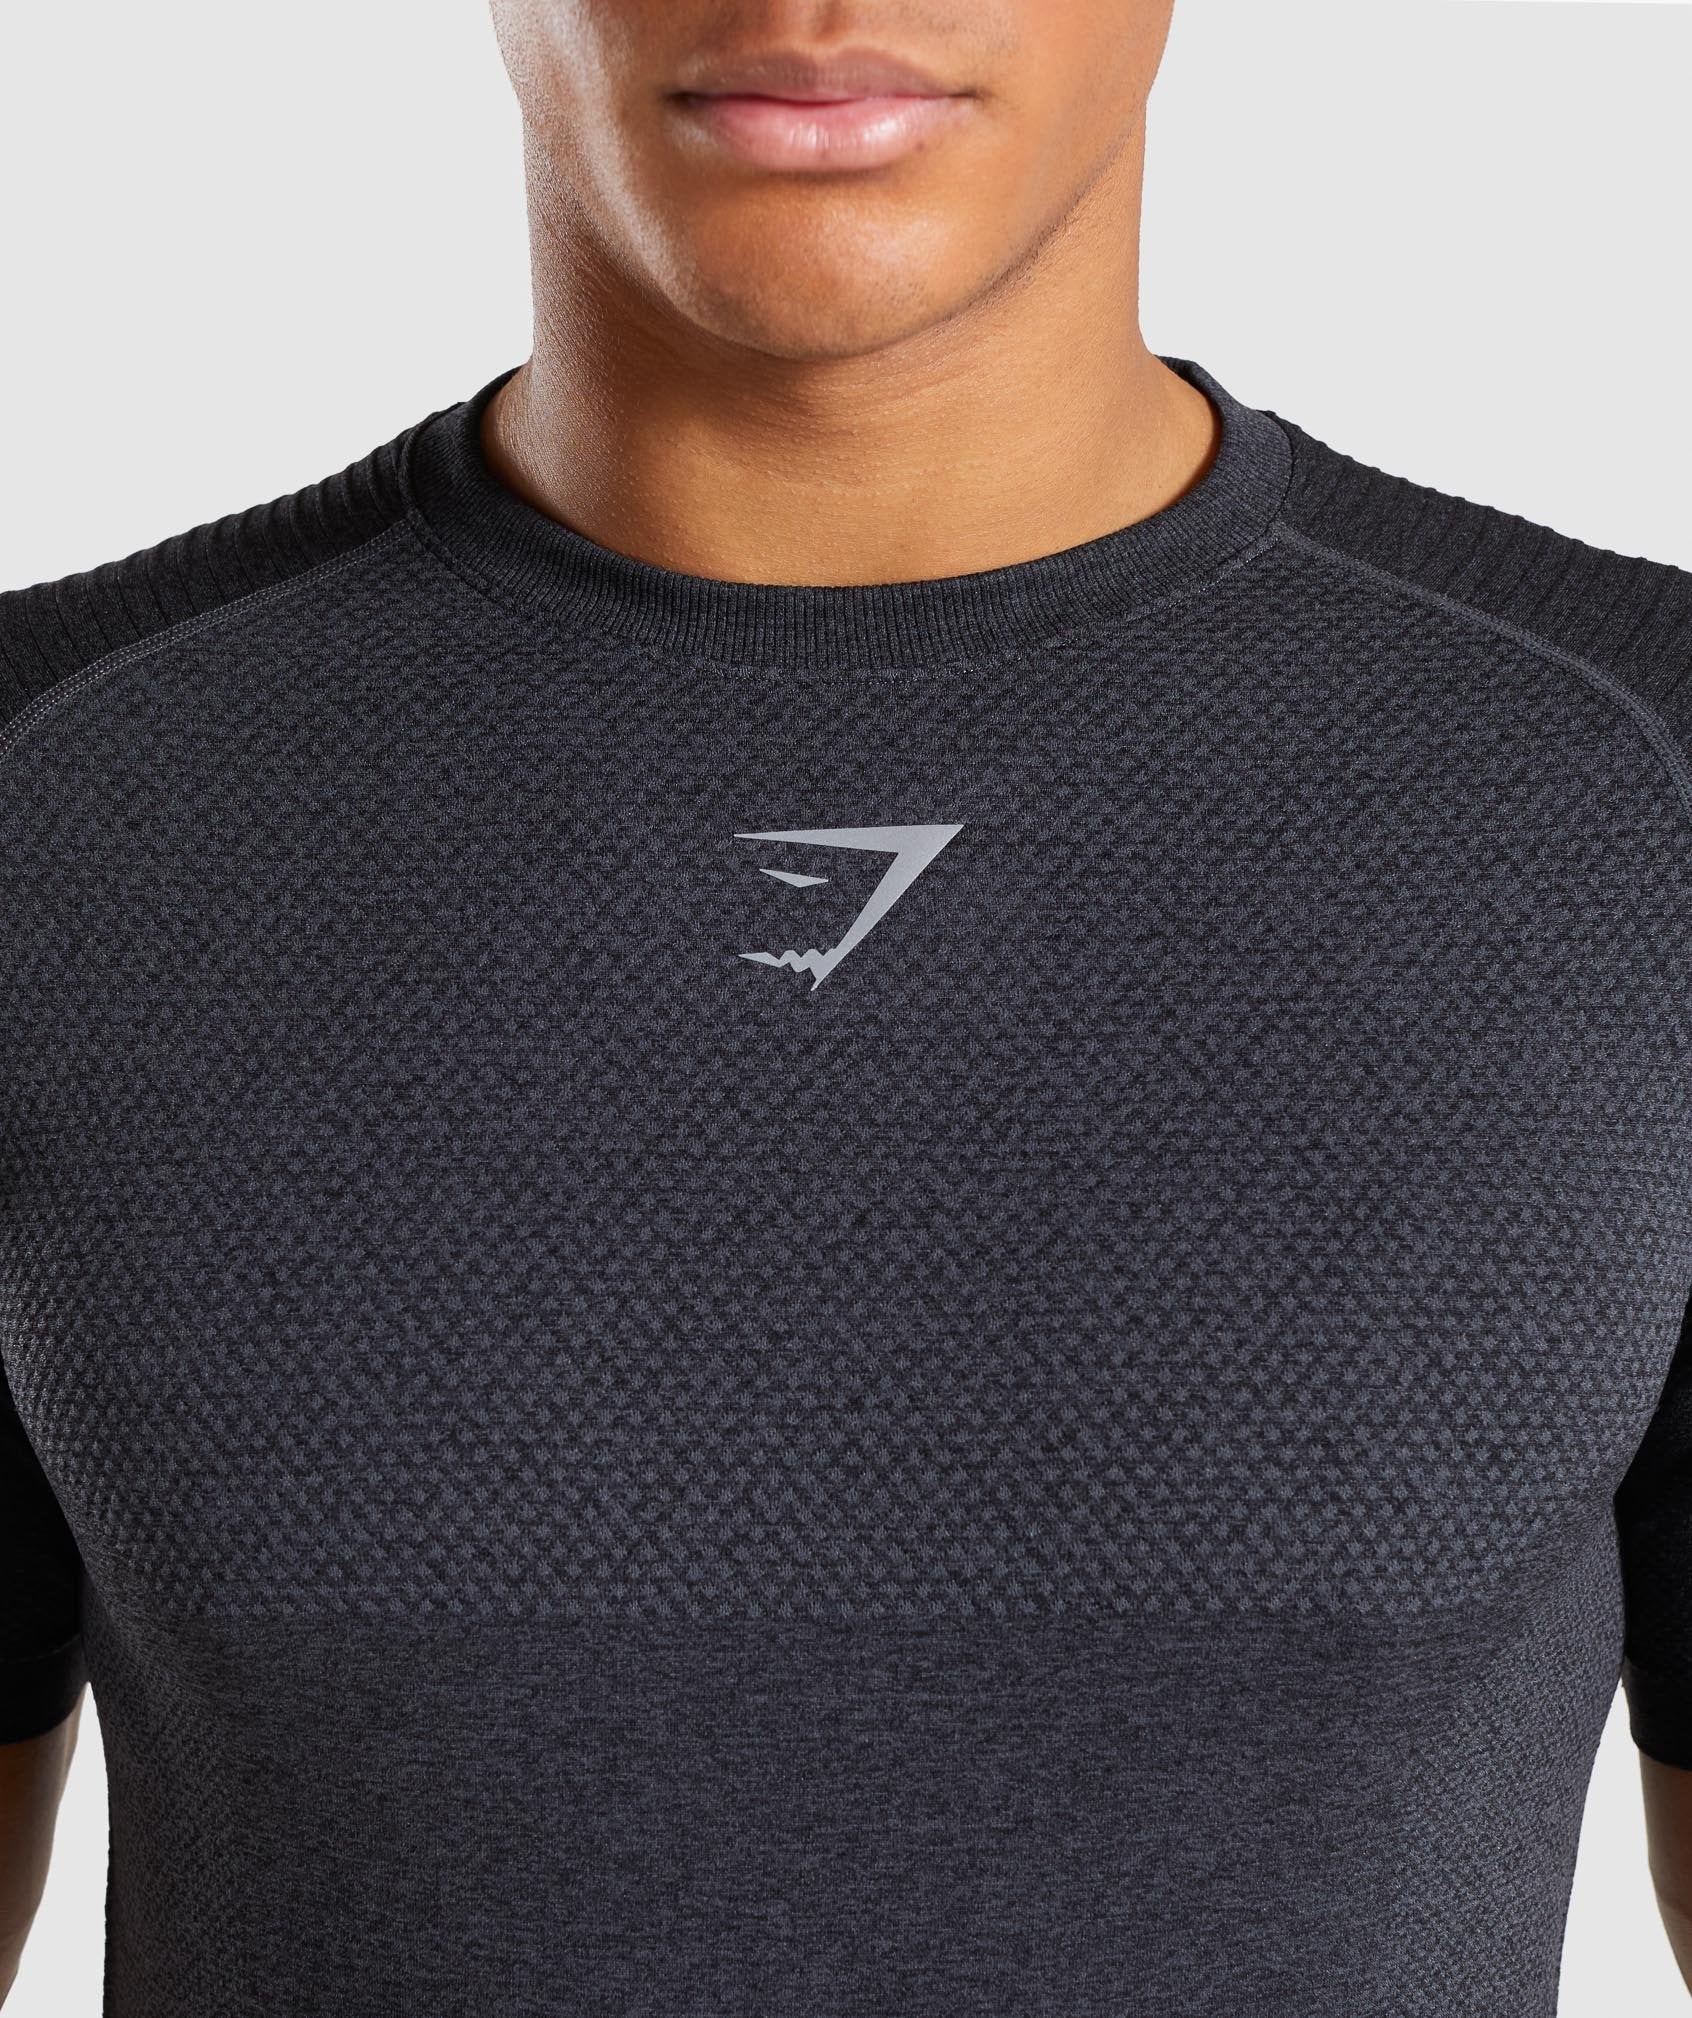 Premium Seamless T-Shirt in Charcoal Marl - view 6